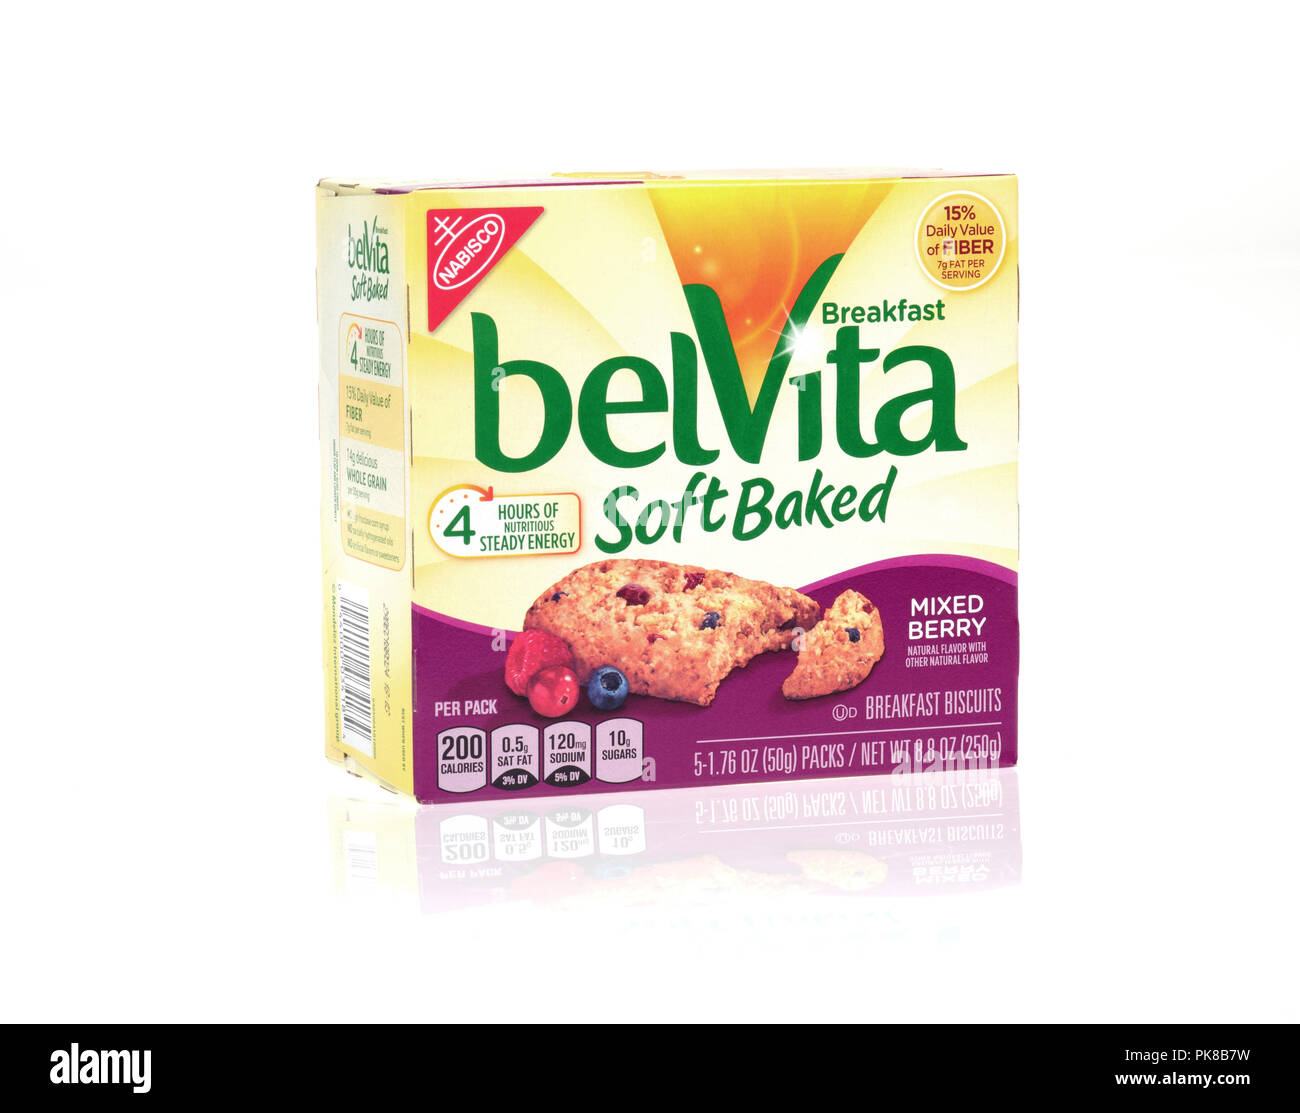 Box of Belvita Soft Baked Mixed Berry Breakfast Biscuits Stock Photo